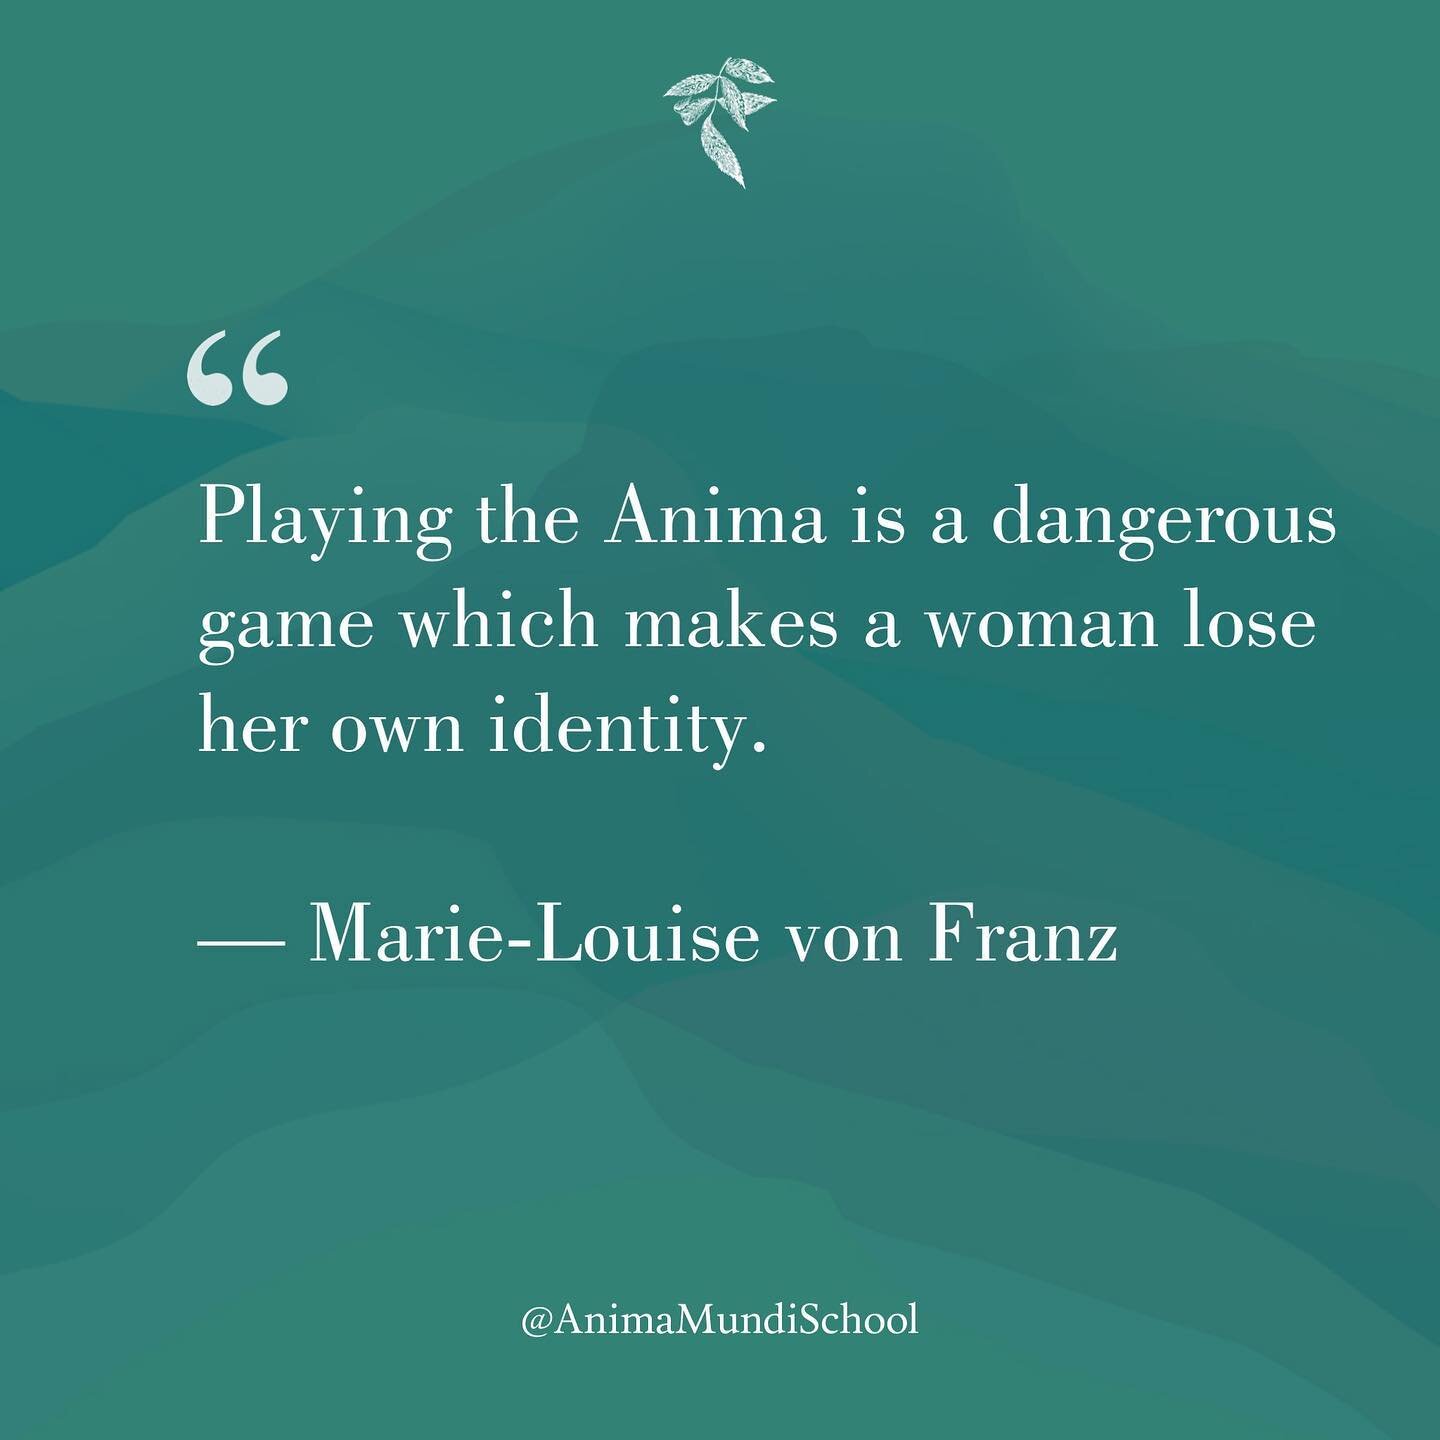 &quot;An anima woman plays the role men expect of her and loses her own identity. This is a widespread and dangerous problem for women which generally leads to disaster.&quot; 

&mdash;Marie-Louise von Franz

According to Jungian psychology 'anima wo